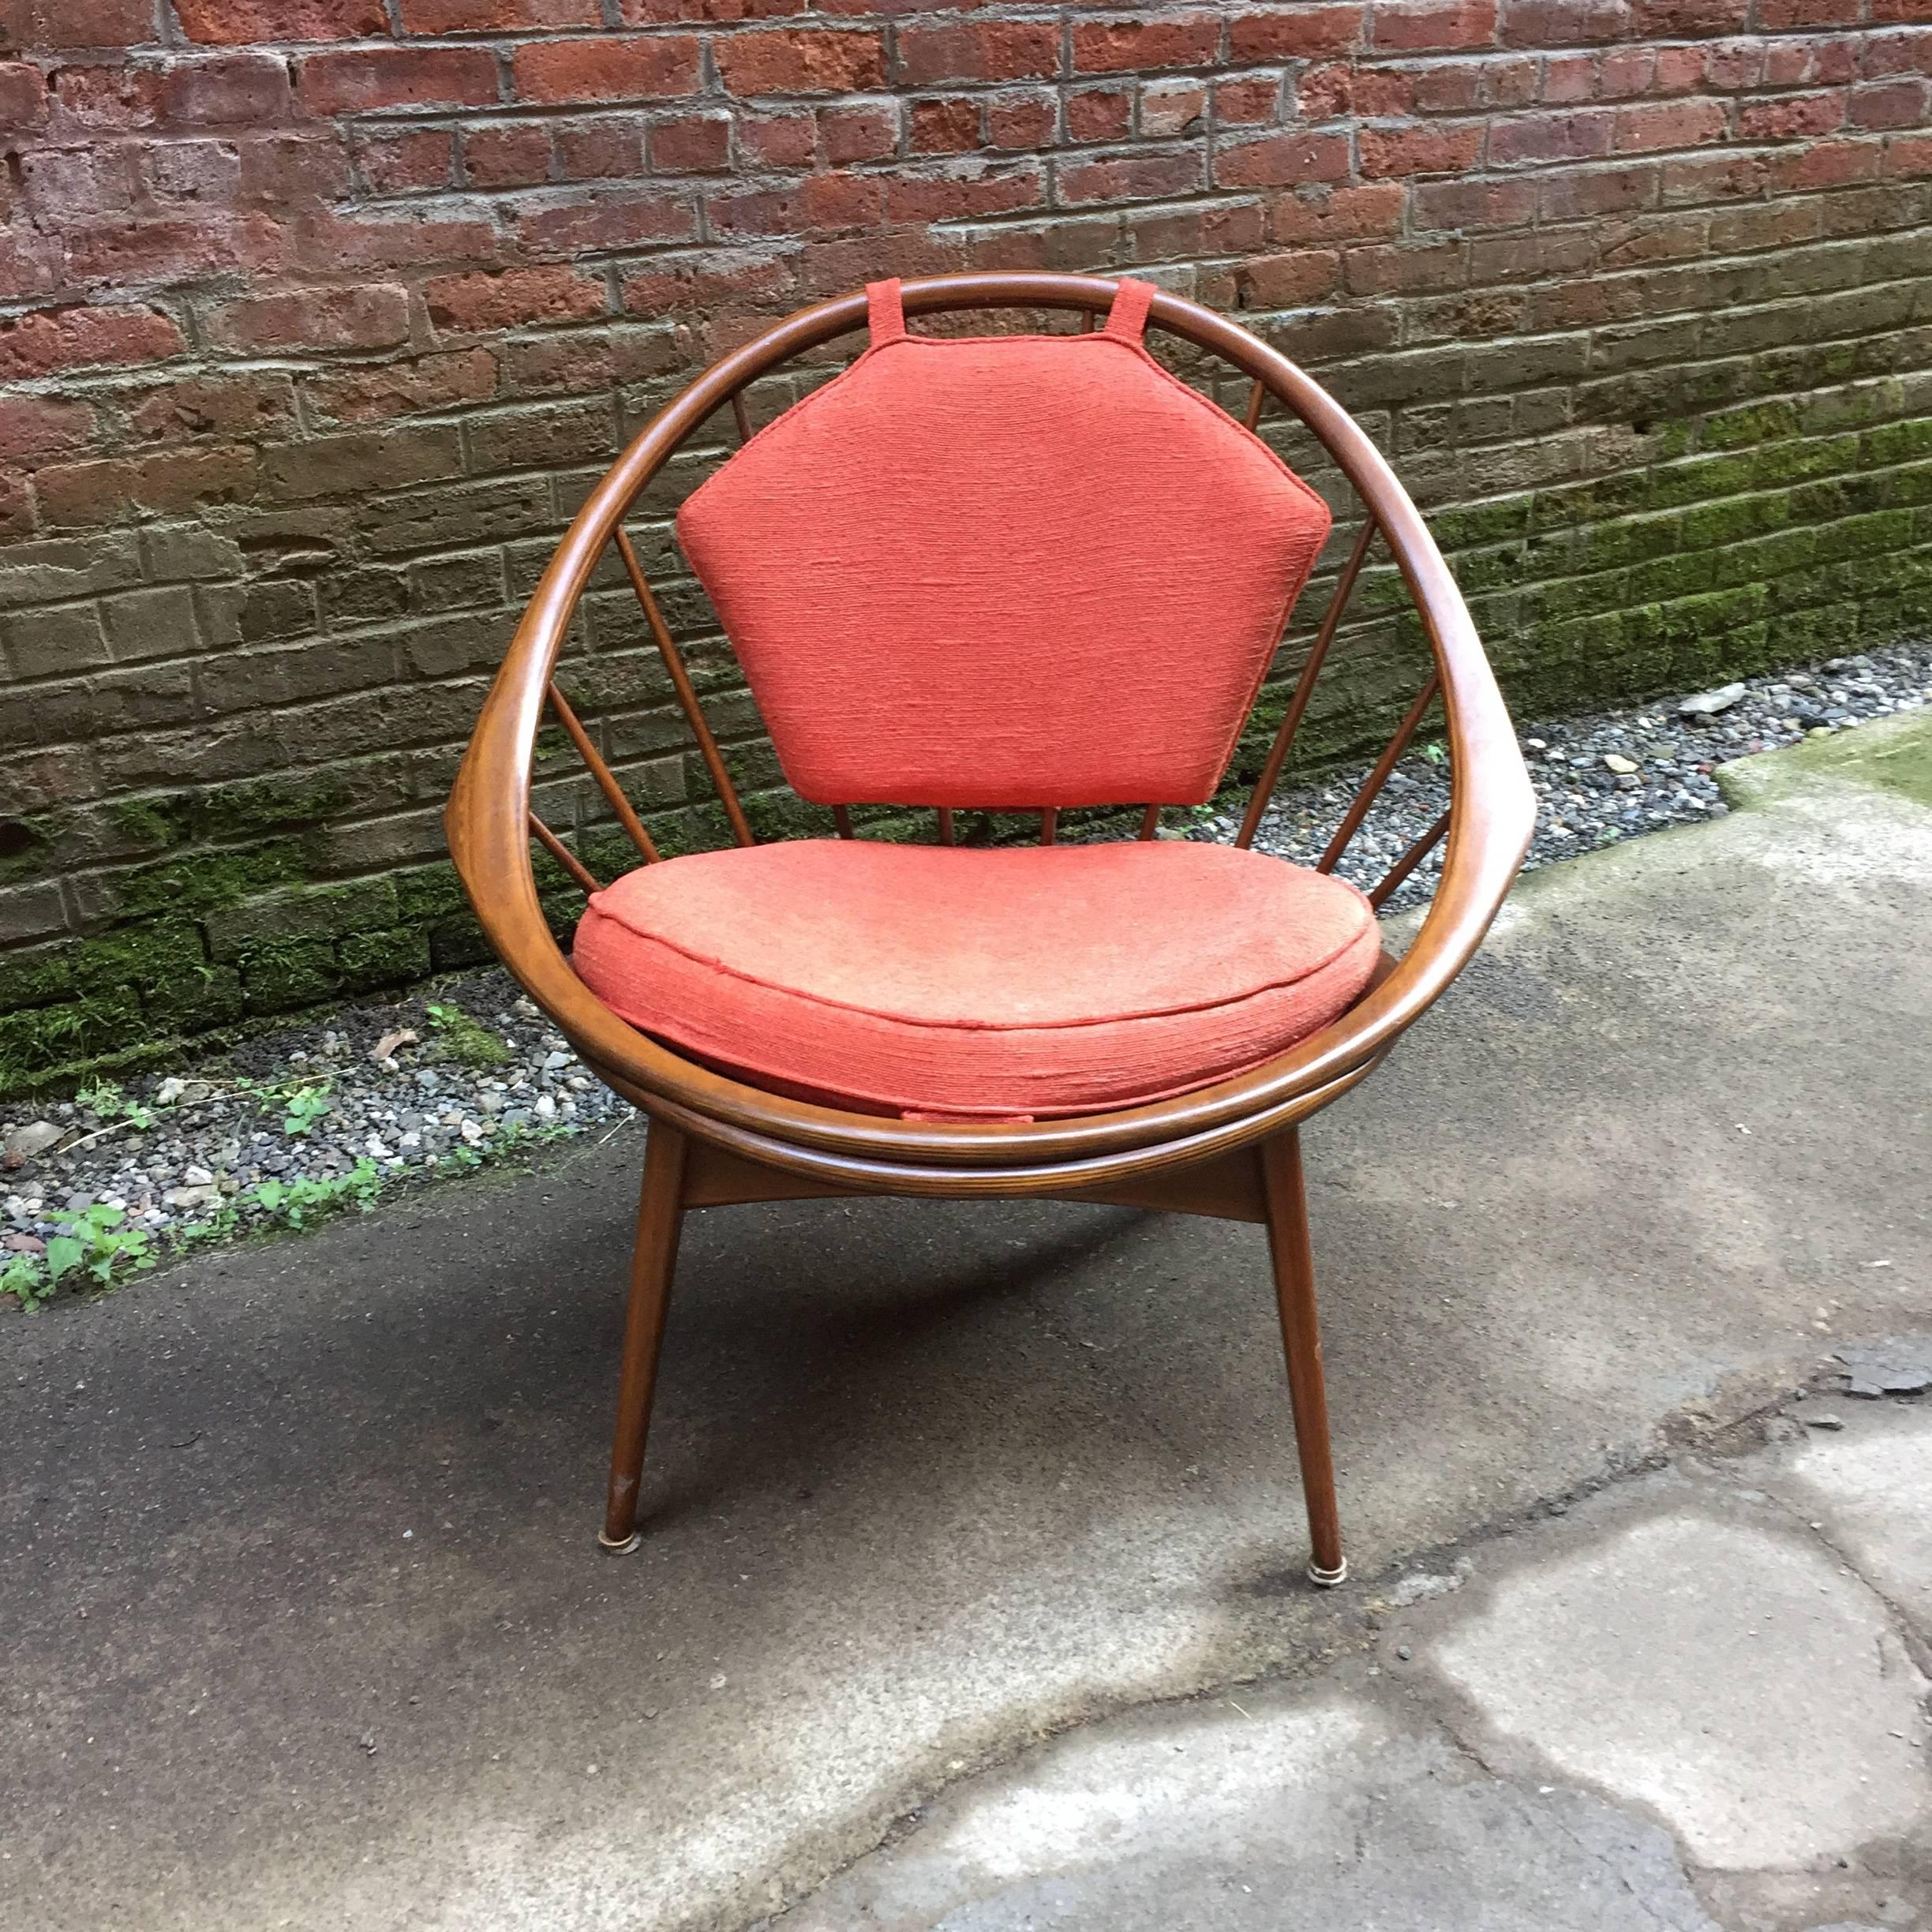 Graceful Ib Kofod-Larsen designed chair for Selig, Denmark. Fully signed with red and white enamel button tag. Walnut spindle back and flared legs. Original red fabric seat and back cushion, circa 1955-1960.